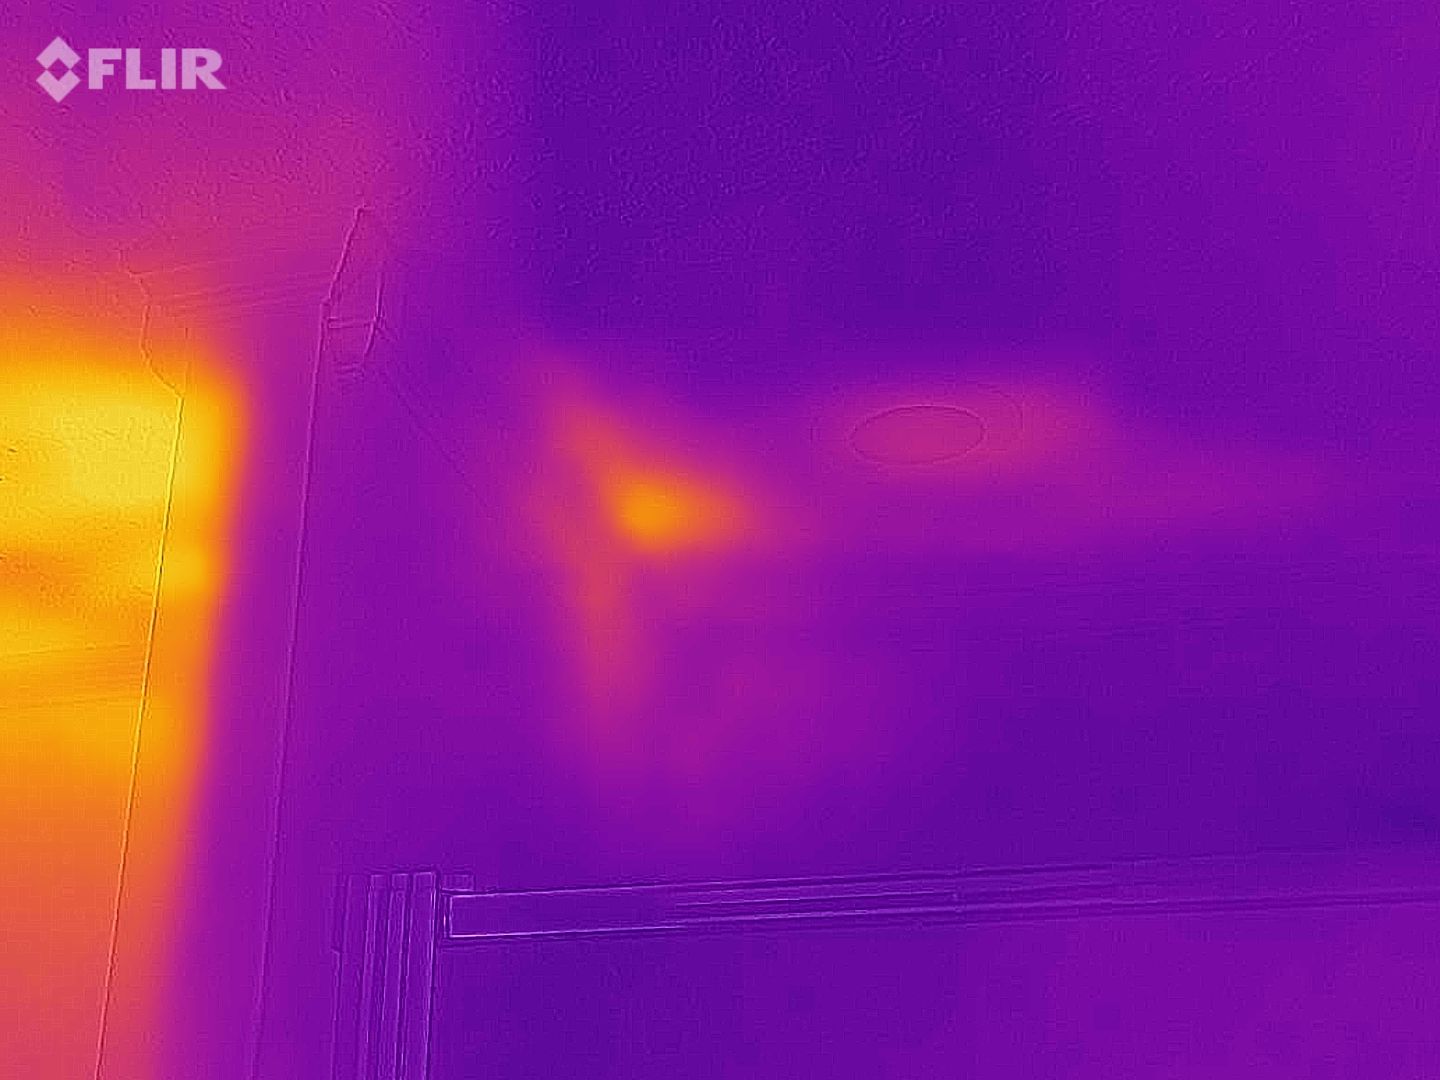 Why you might want a FLIR Camera